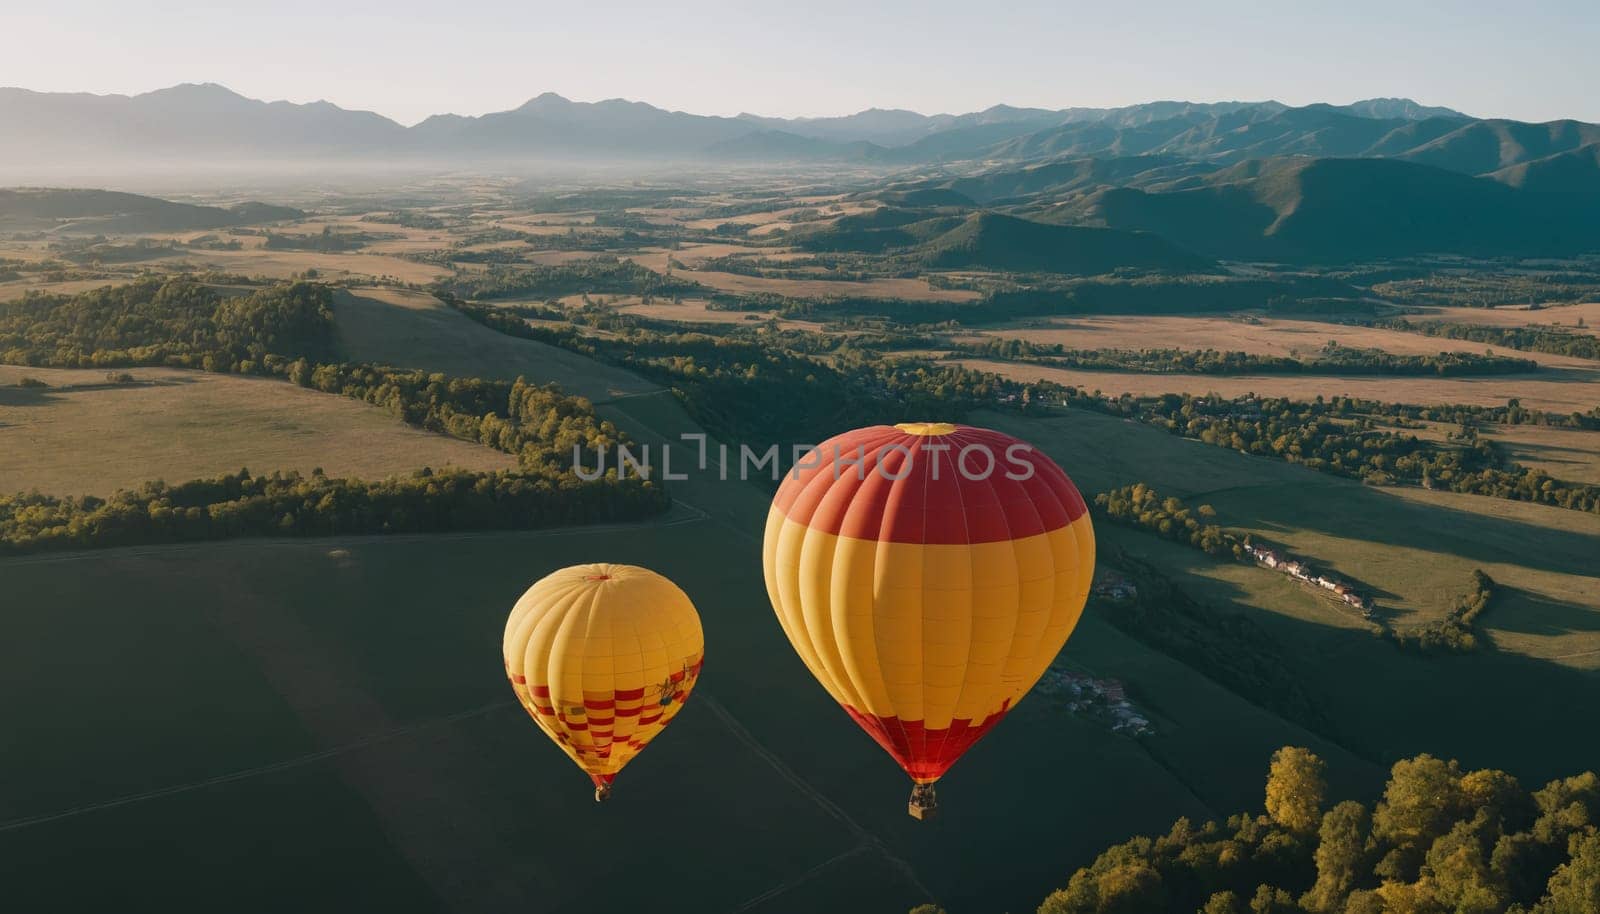 Spectacular views of colorful hot air balloons floating above the scenic landscape during golden hour. The image captures the essence of freedom and adventure.